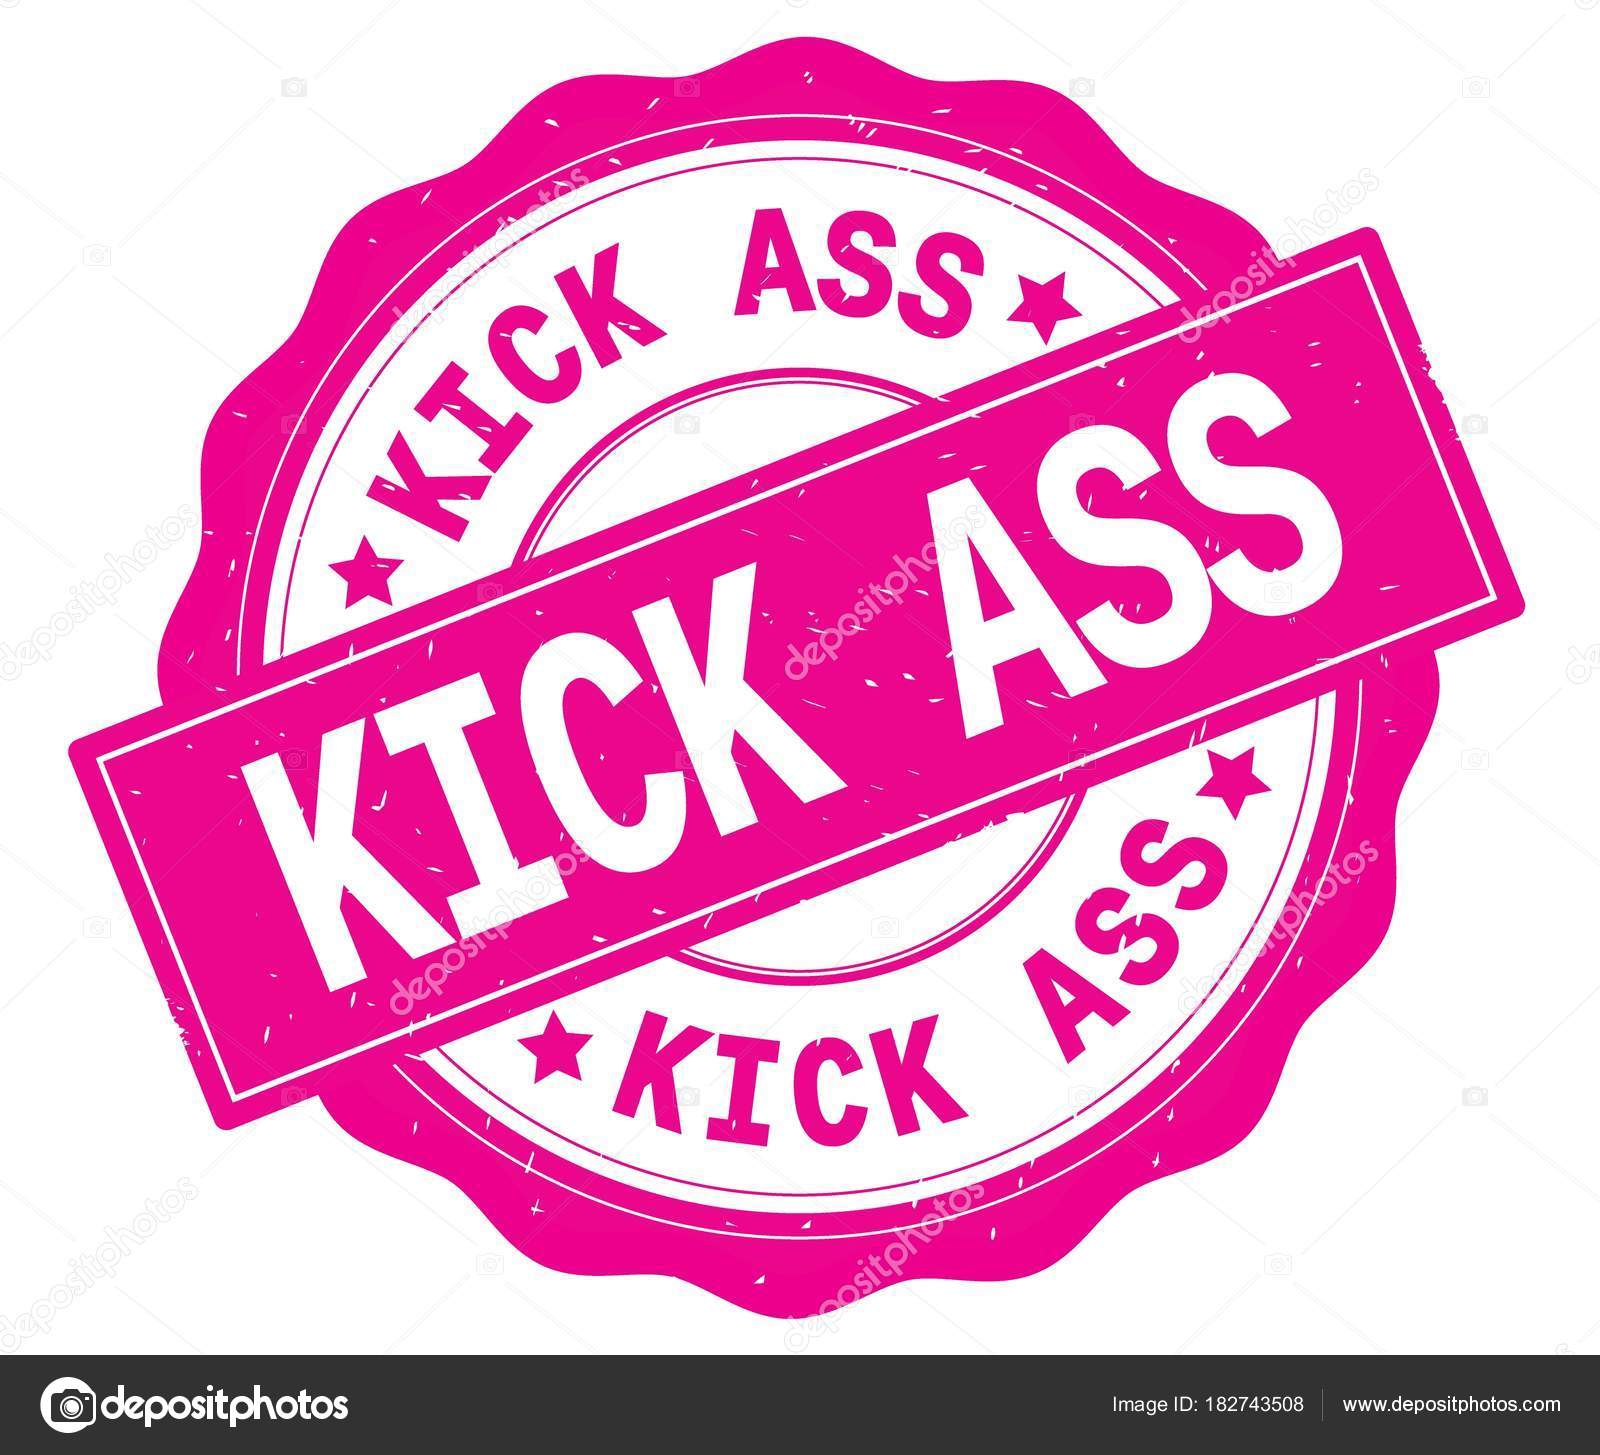 Image result for kick ass badge